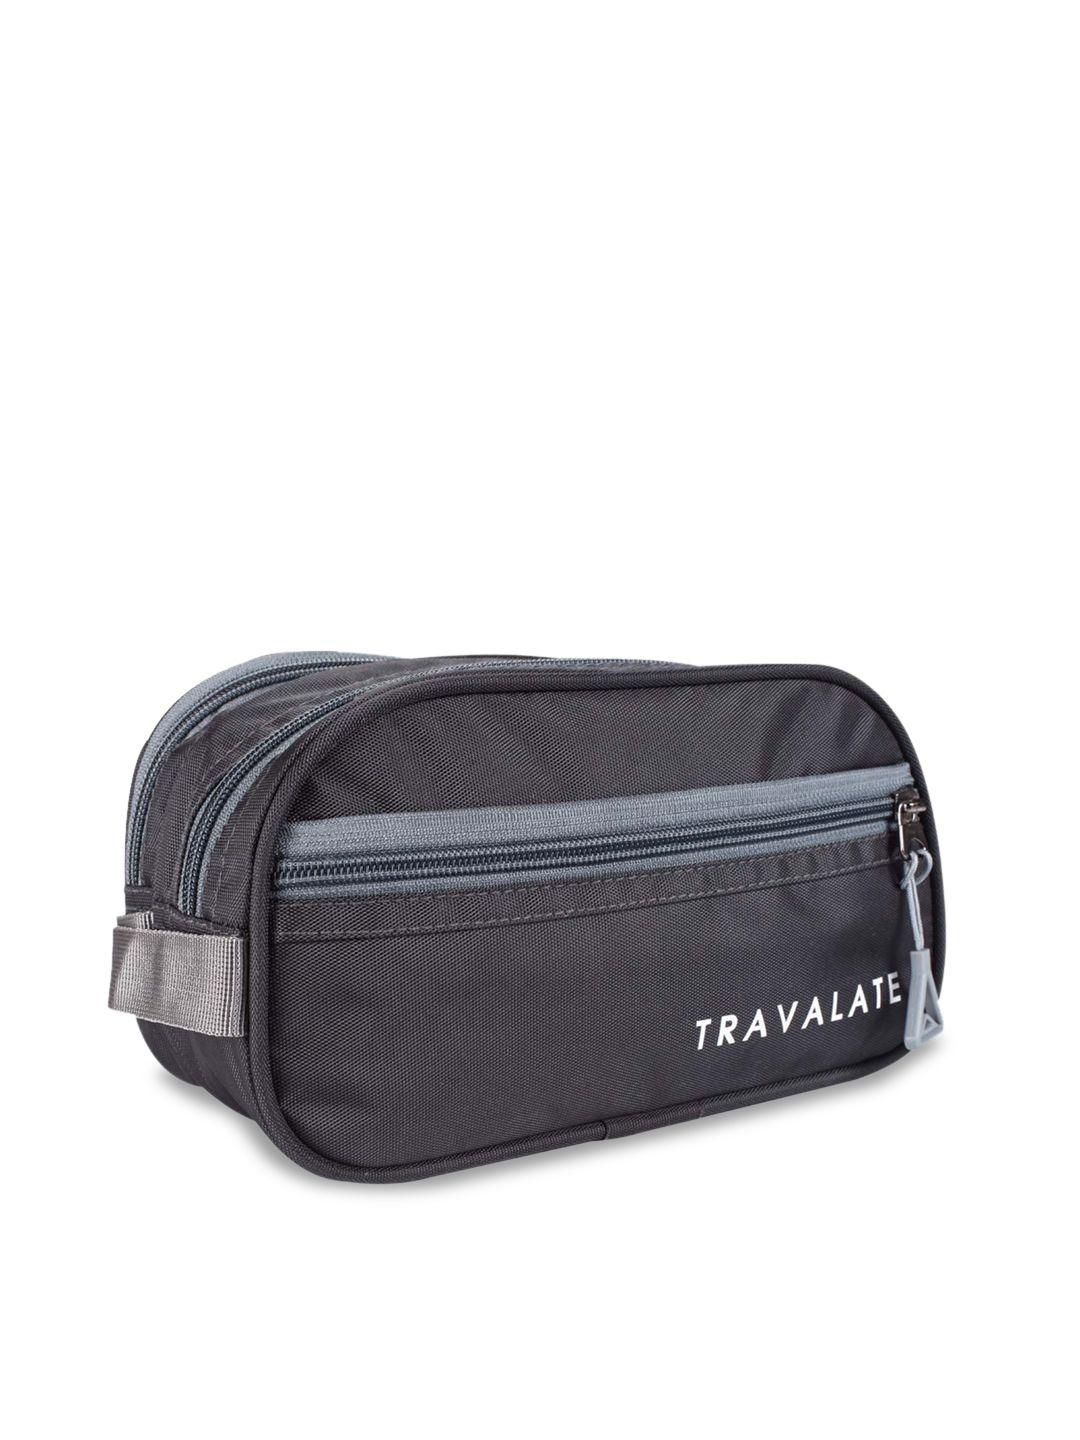 travalate grey solid toiletry travel pouch